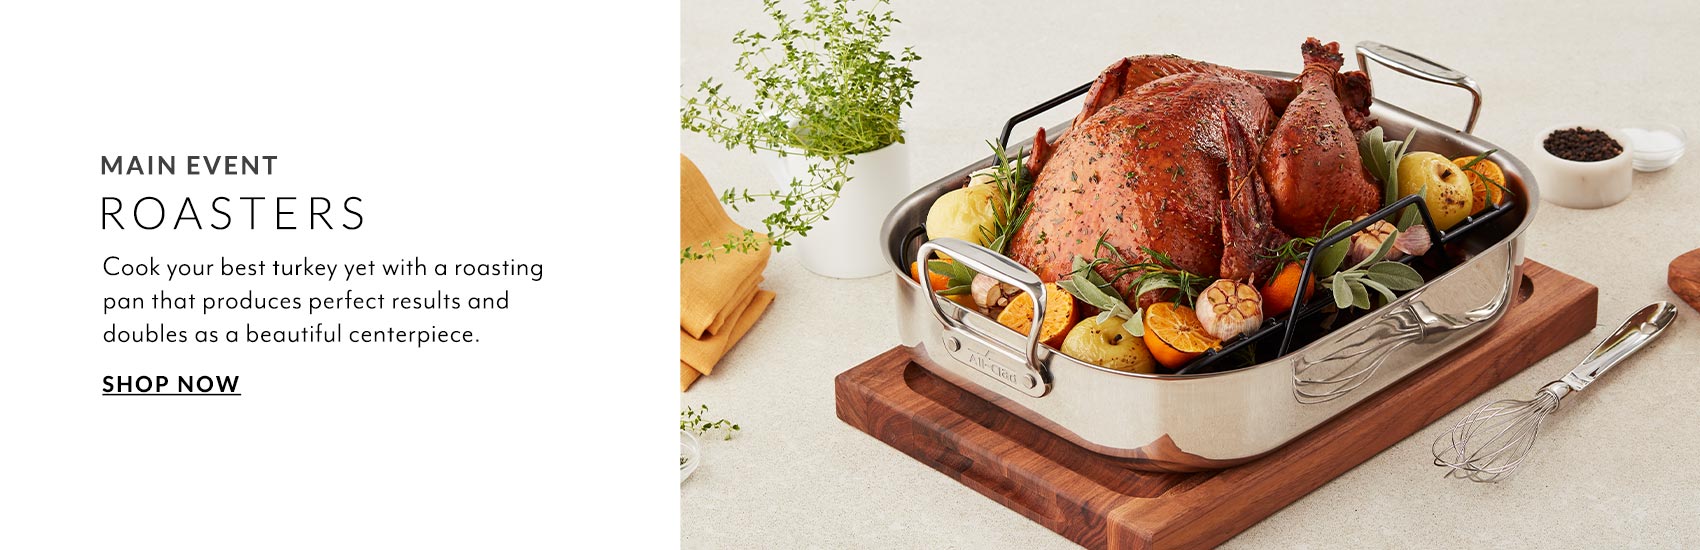 Roasters. Cook your best turkey yet with a roasting pan that produces perfect results and doubles as a beautiful centerpiece.